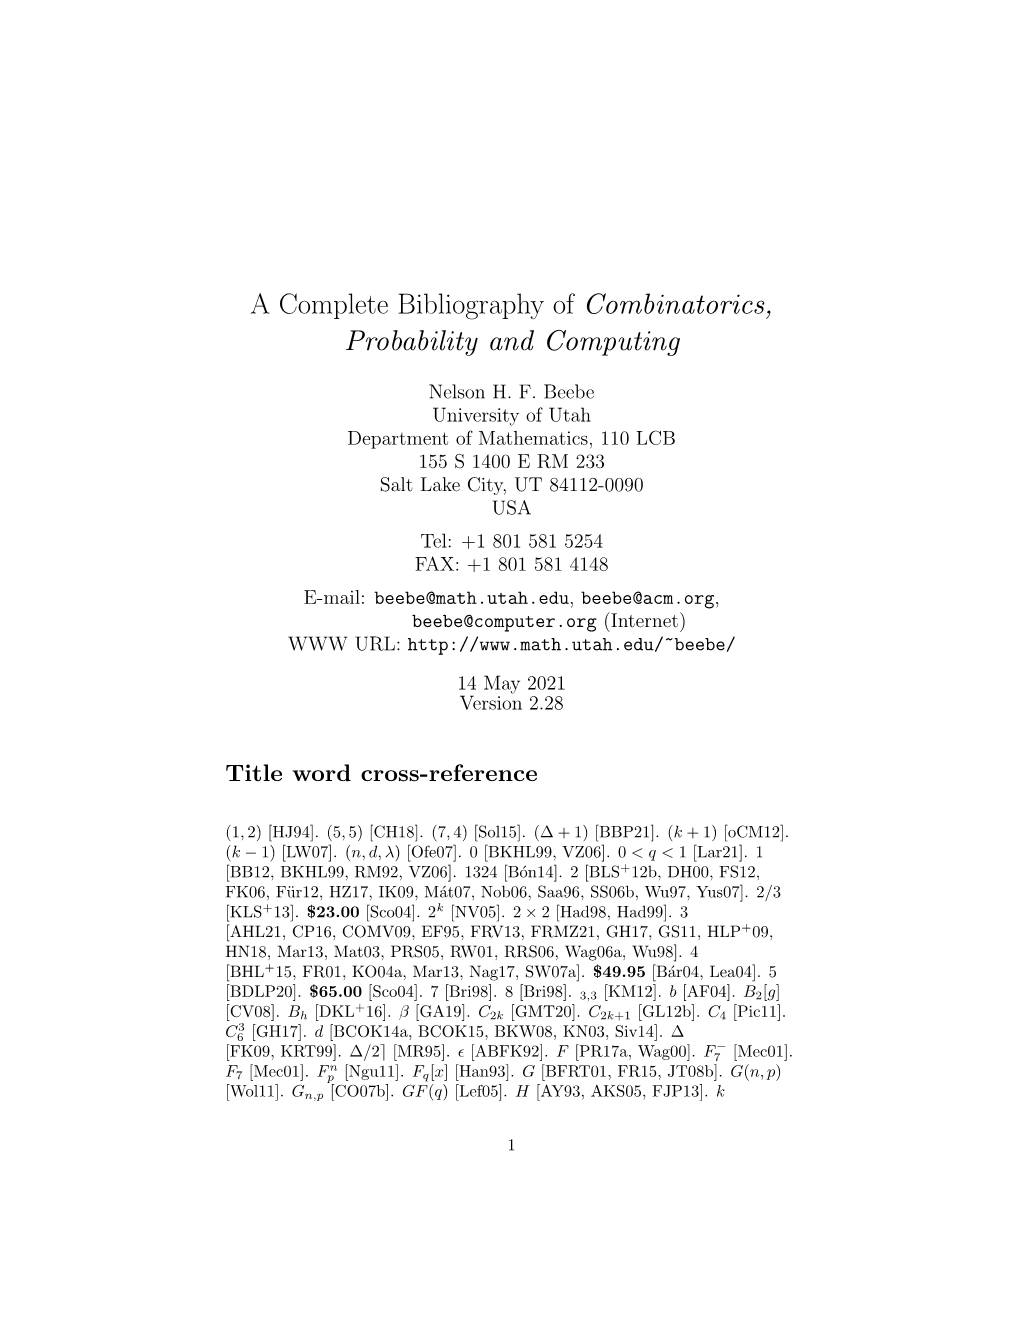 A Complete Bibliography of Combinatorics, Probability and Computing